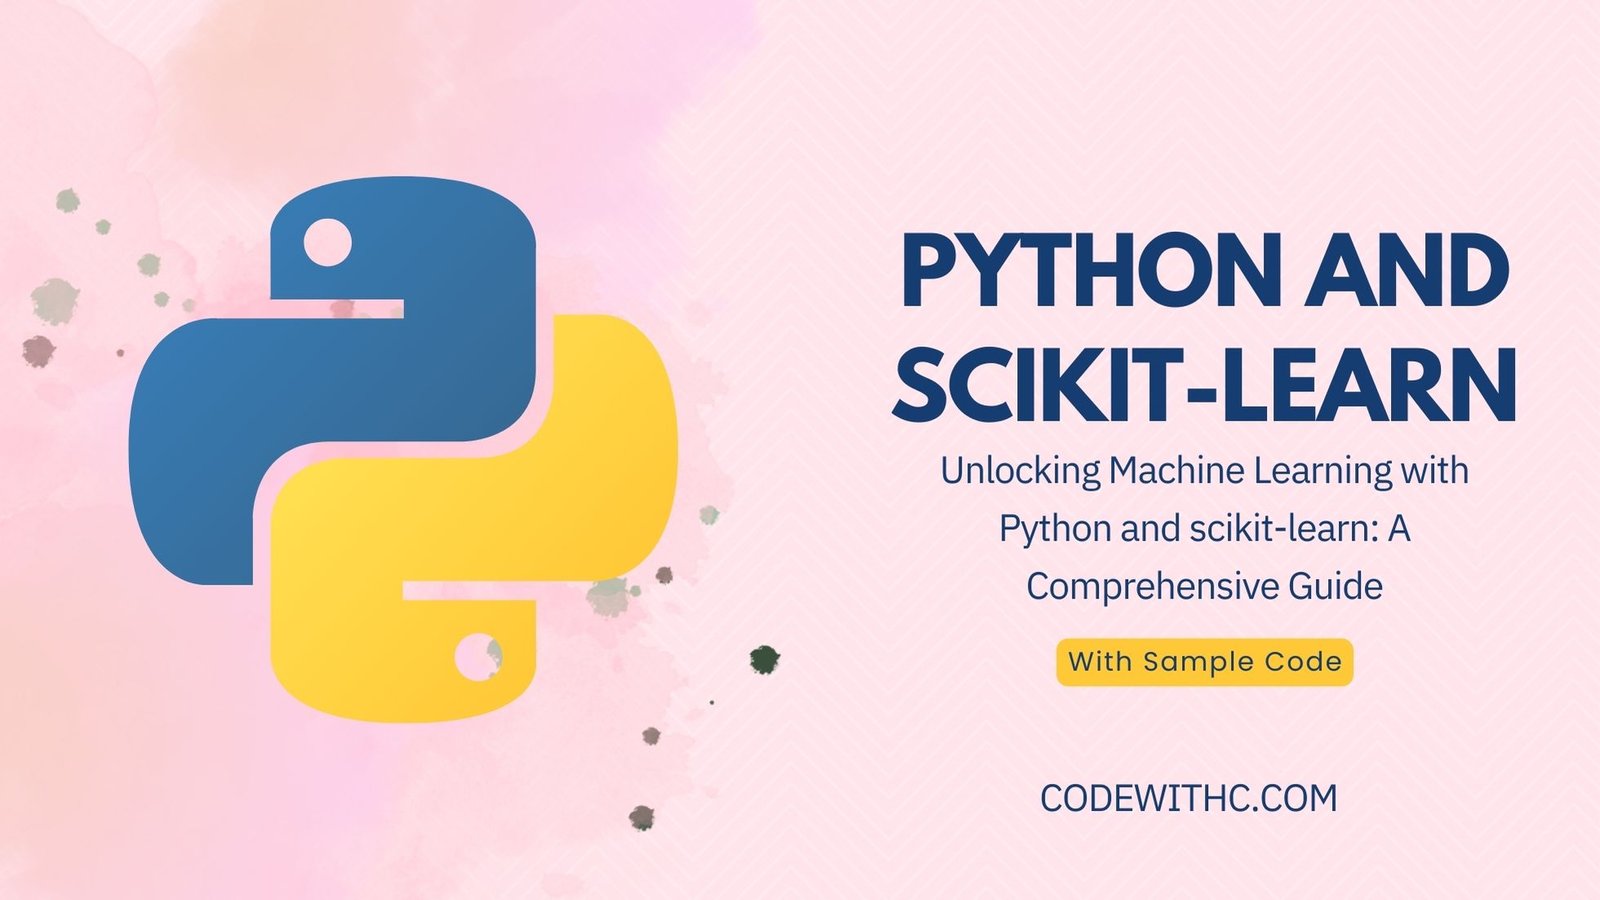 Python and scikit-learn